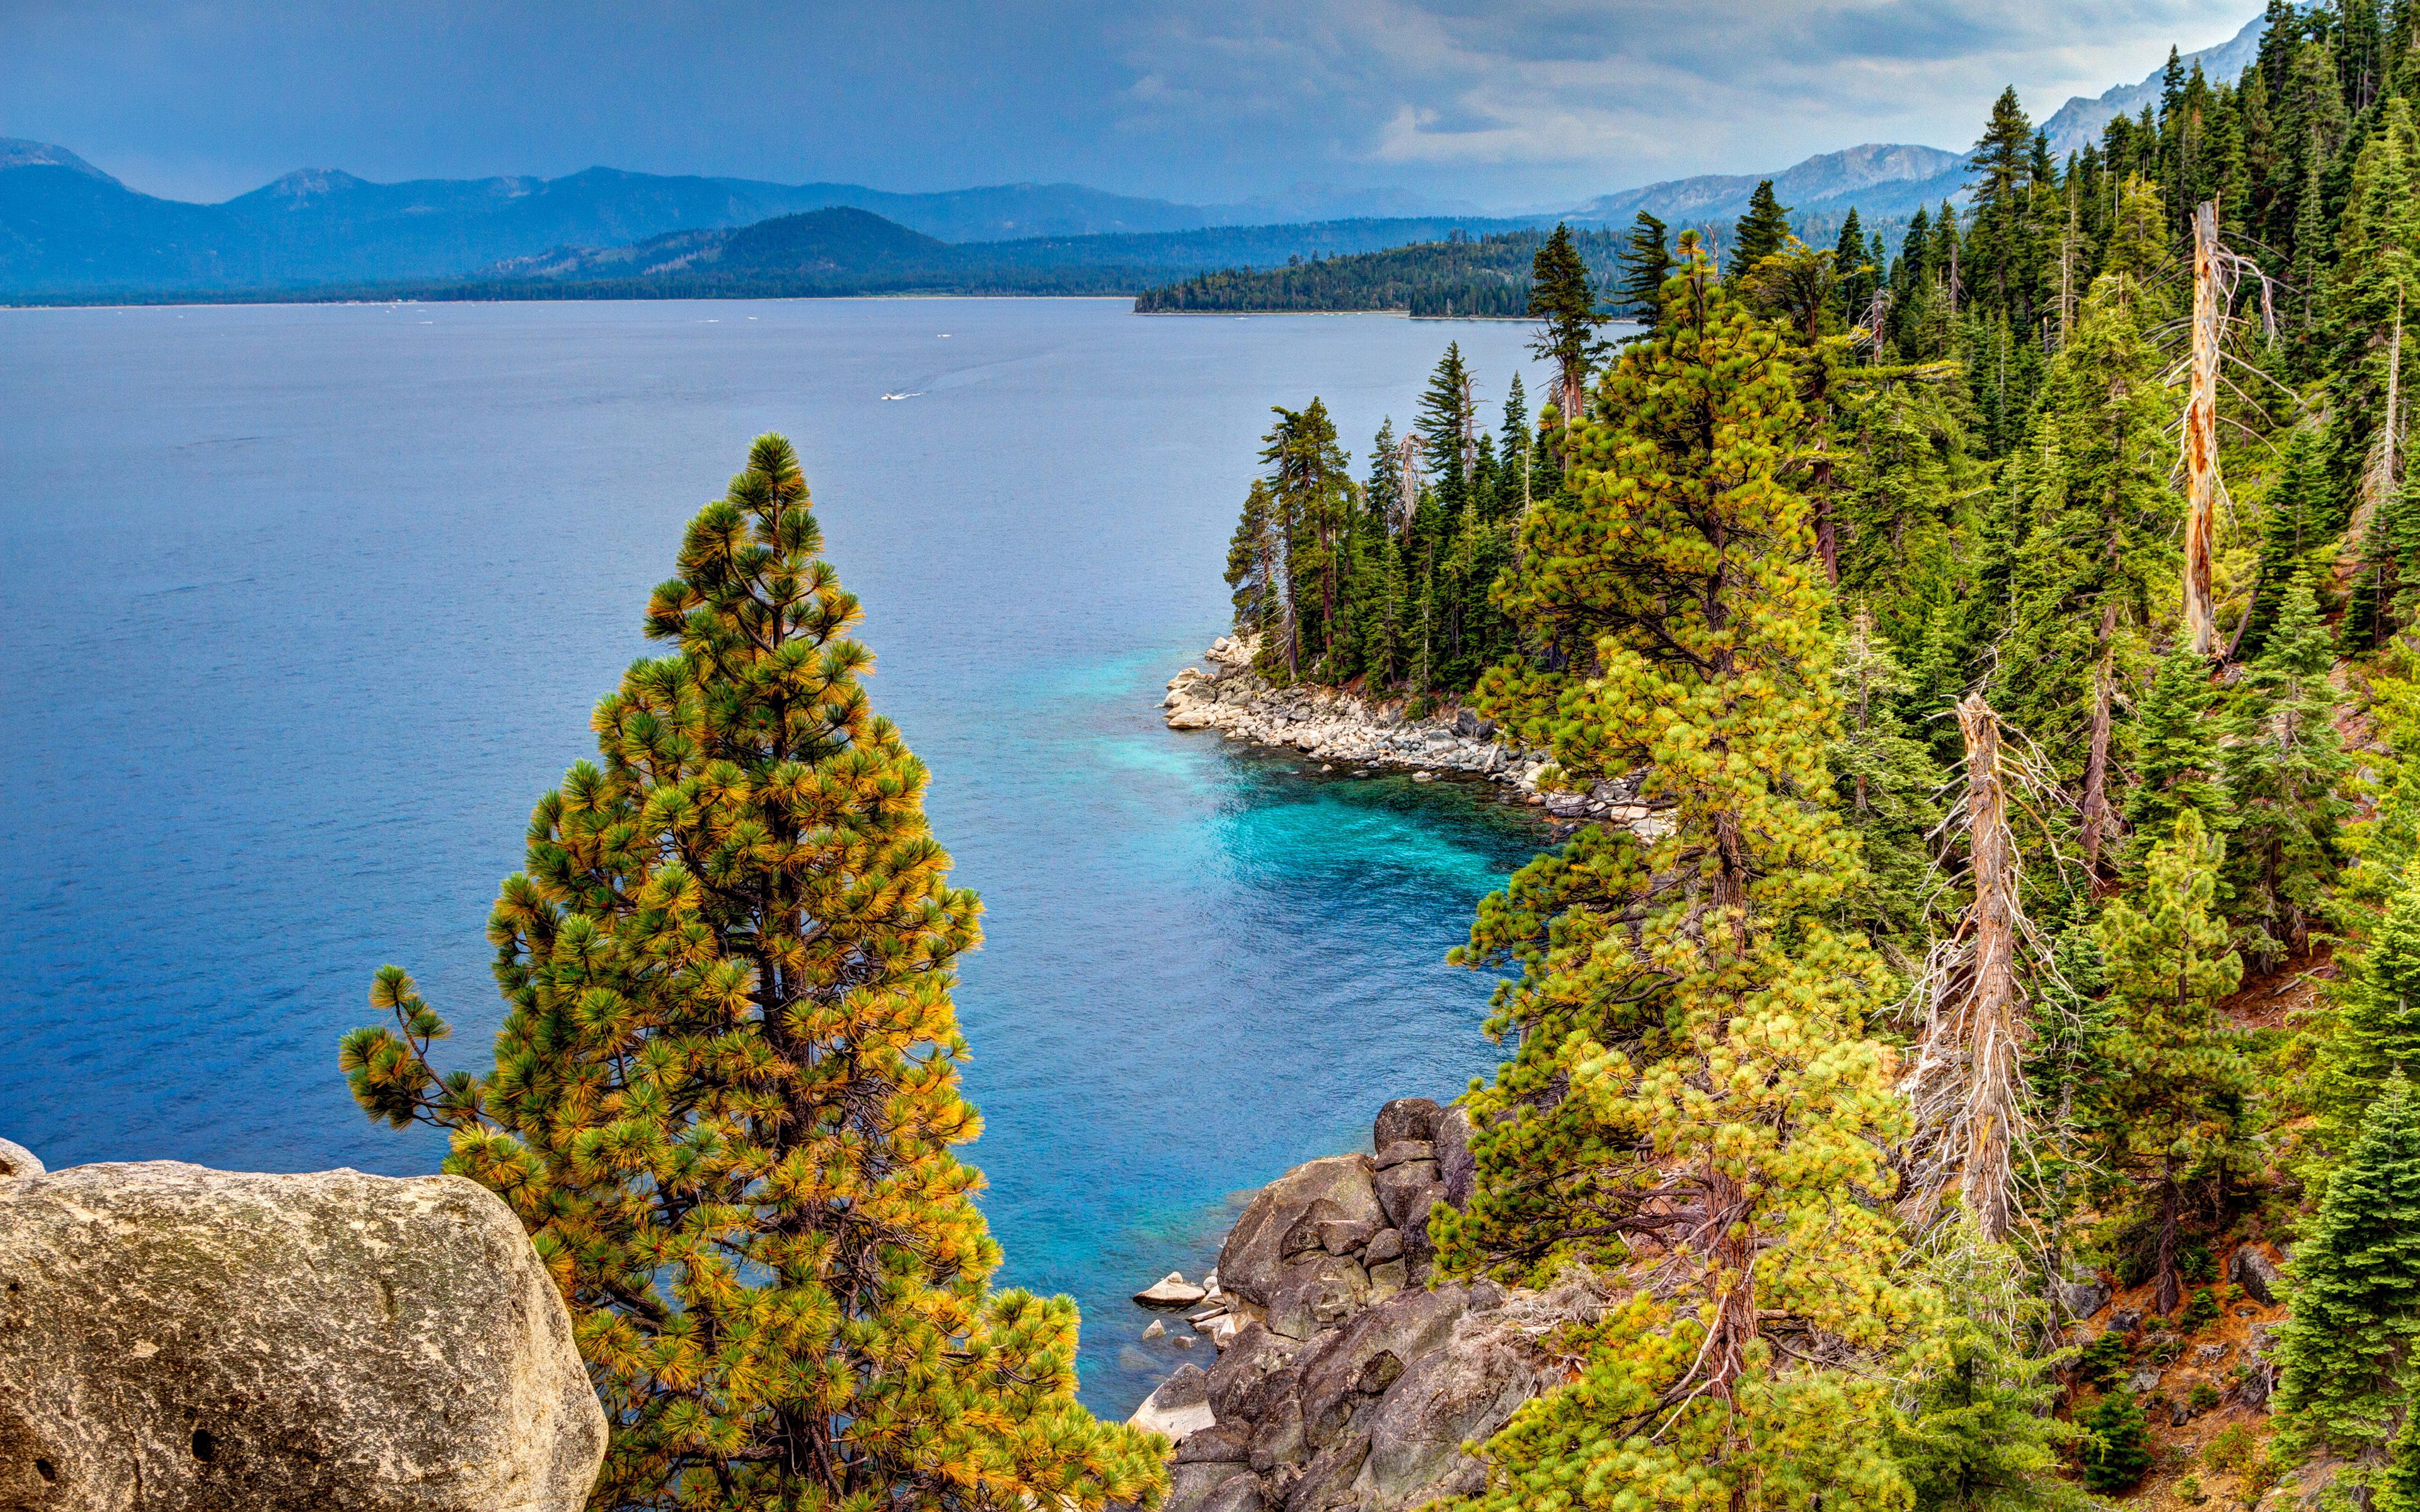 3840x2400 Download Wallpaper Lake Tahoe 4k Summer Beautiful Nature California Forest Usa America For Desktop With Resolution 3840x2400 High Quality Hd Picture Wallpaper